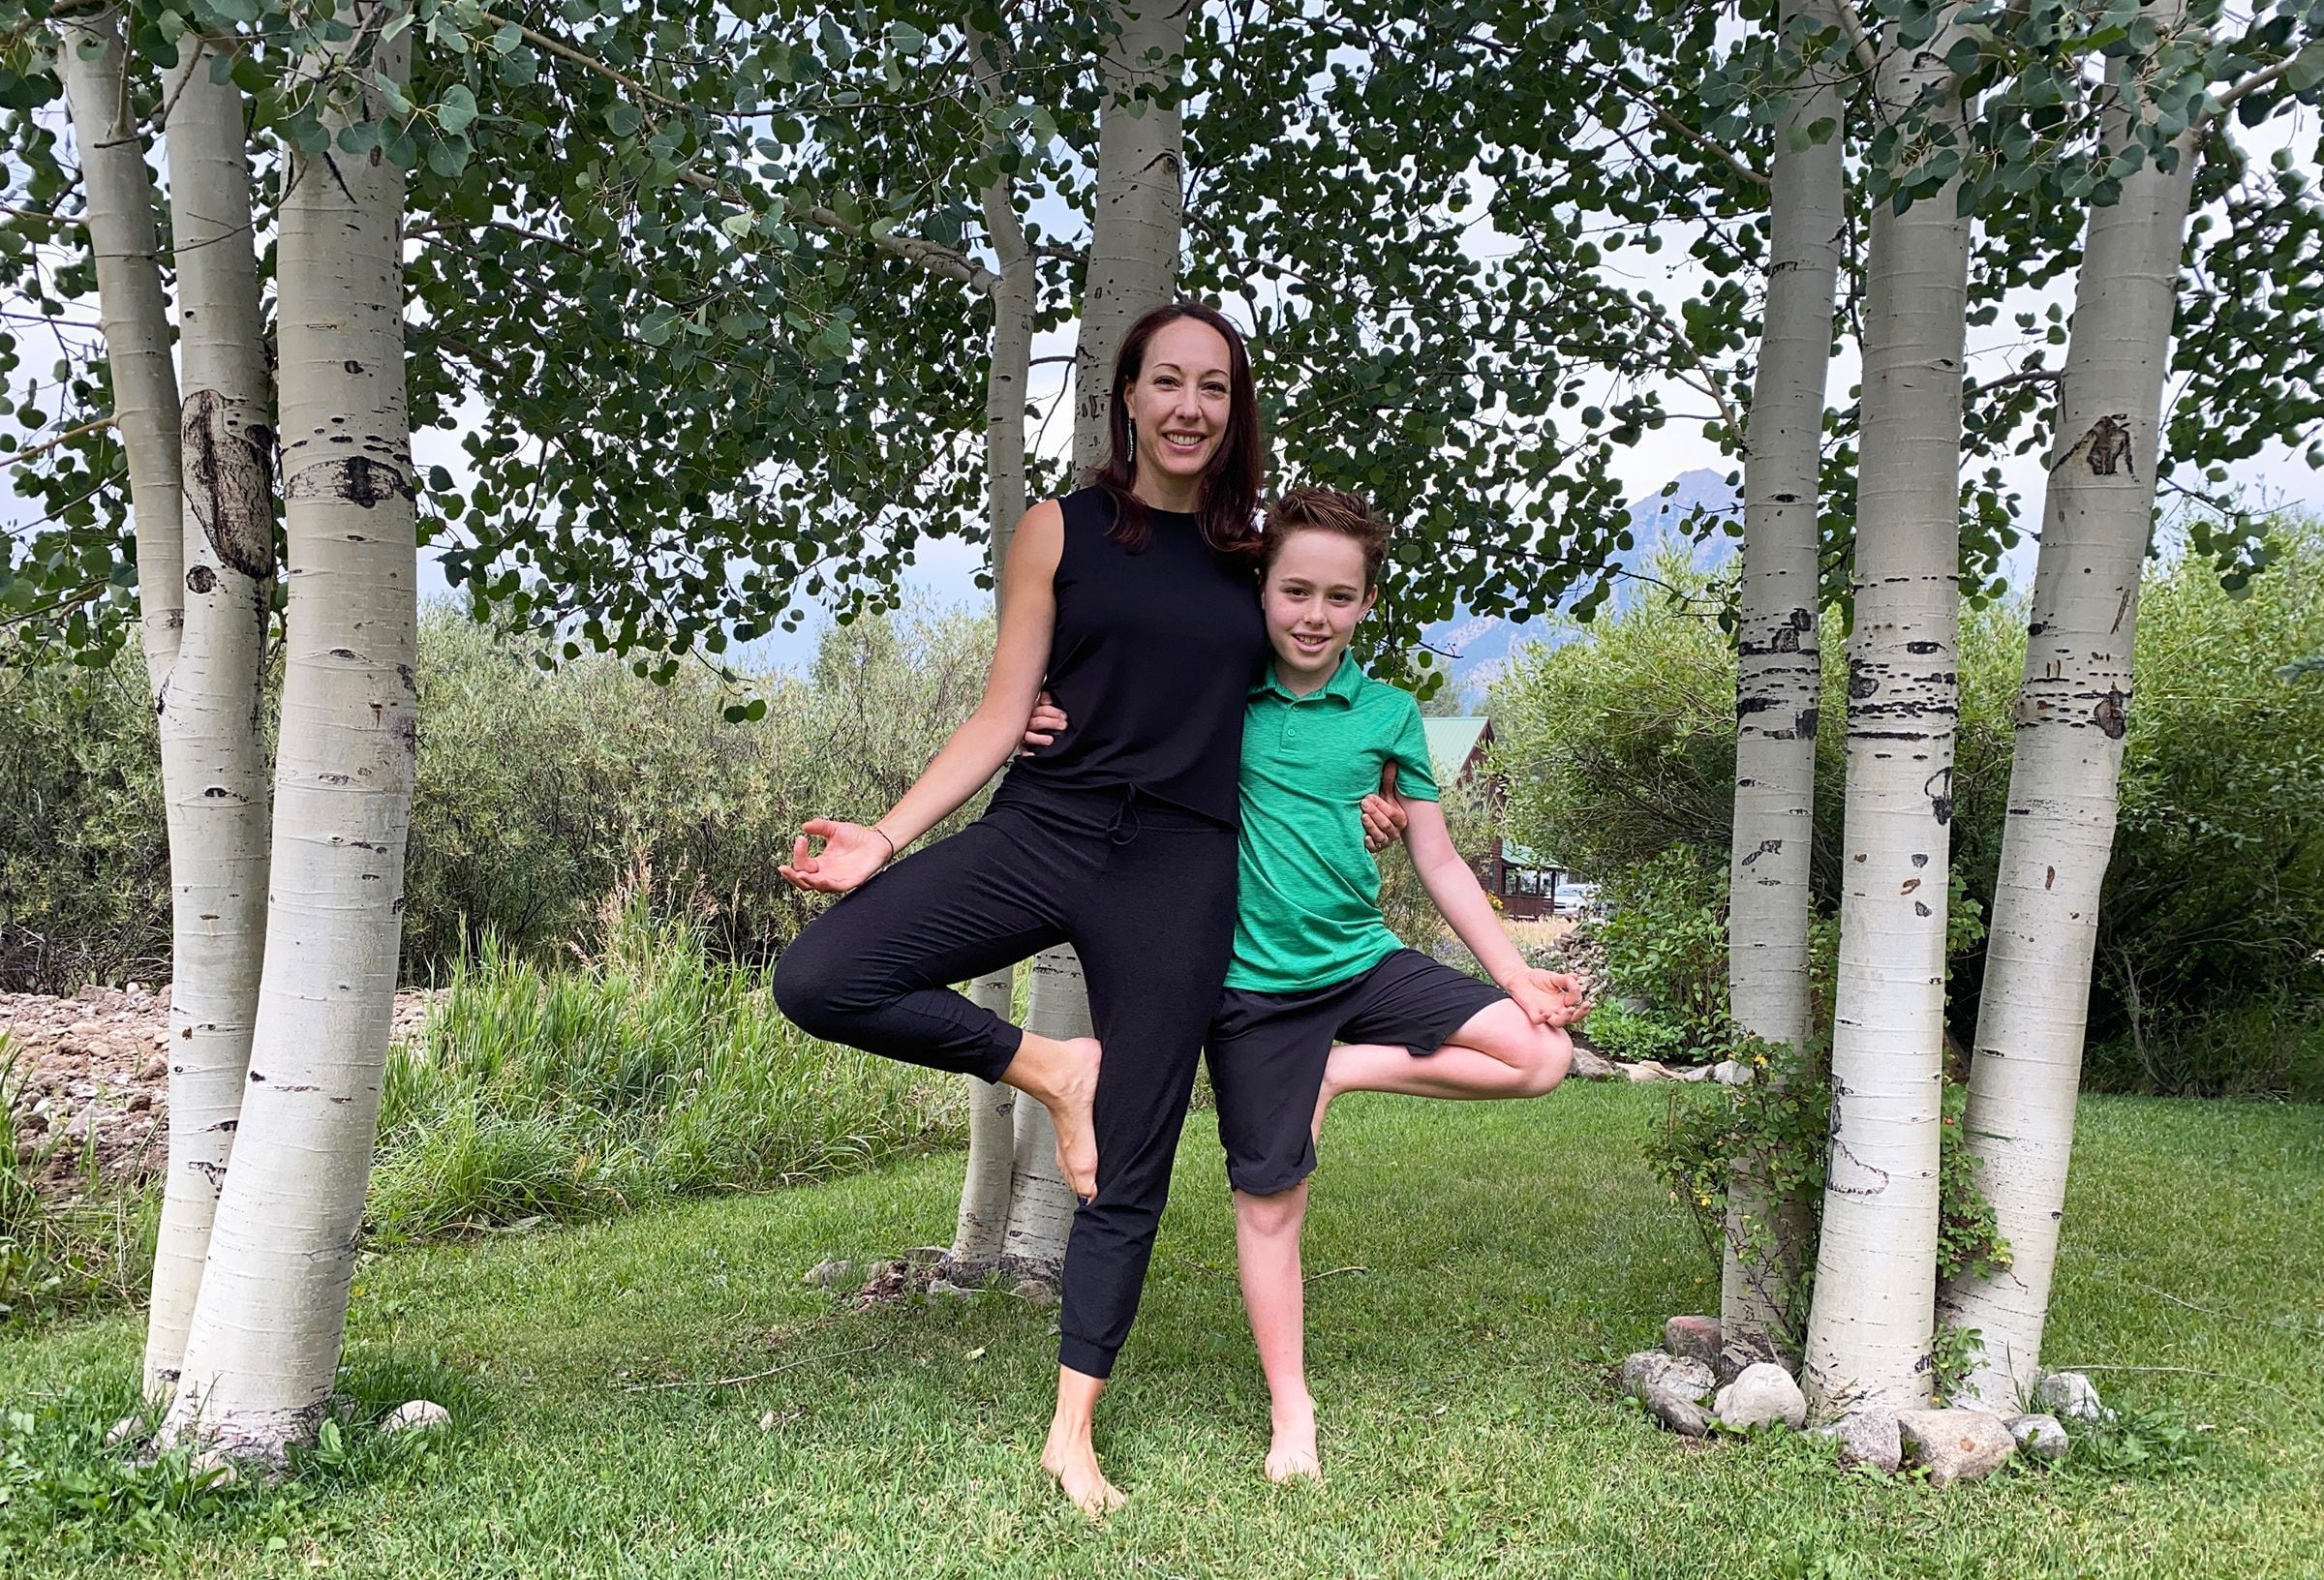 6 easy yoga poses for kids - Today's Parent